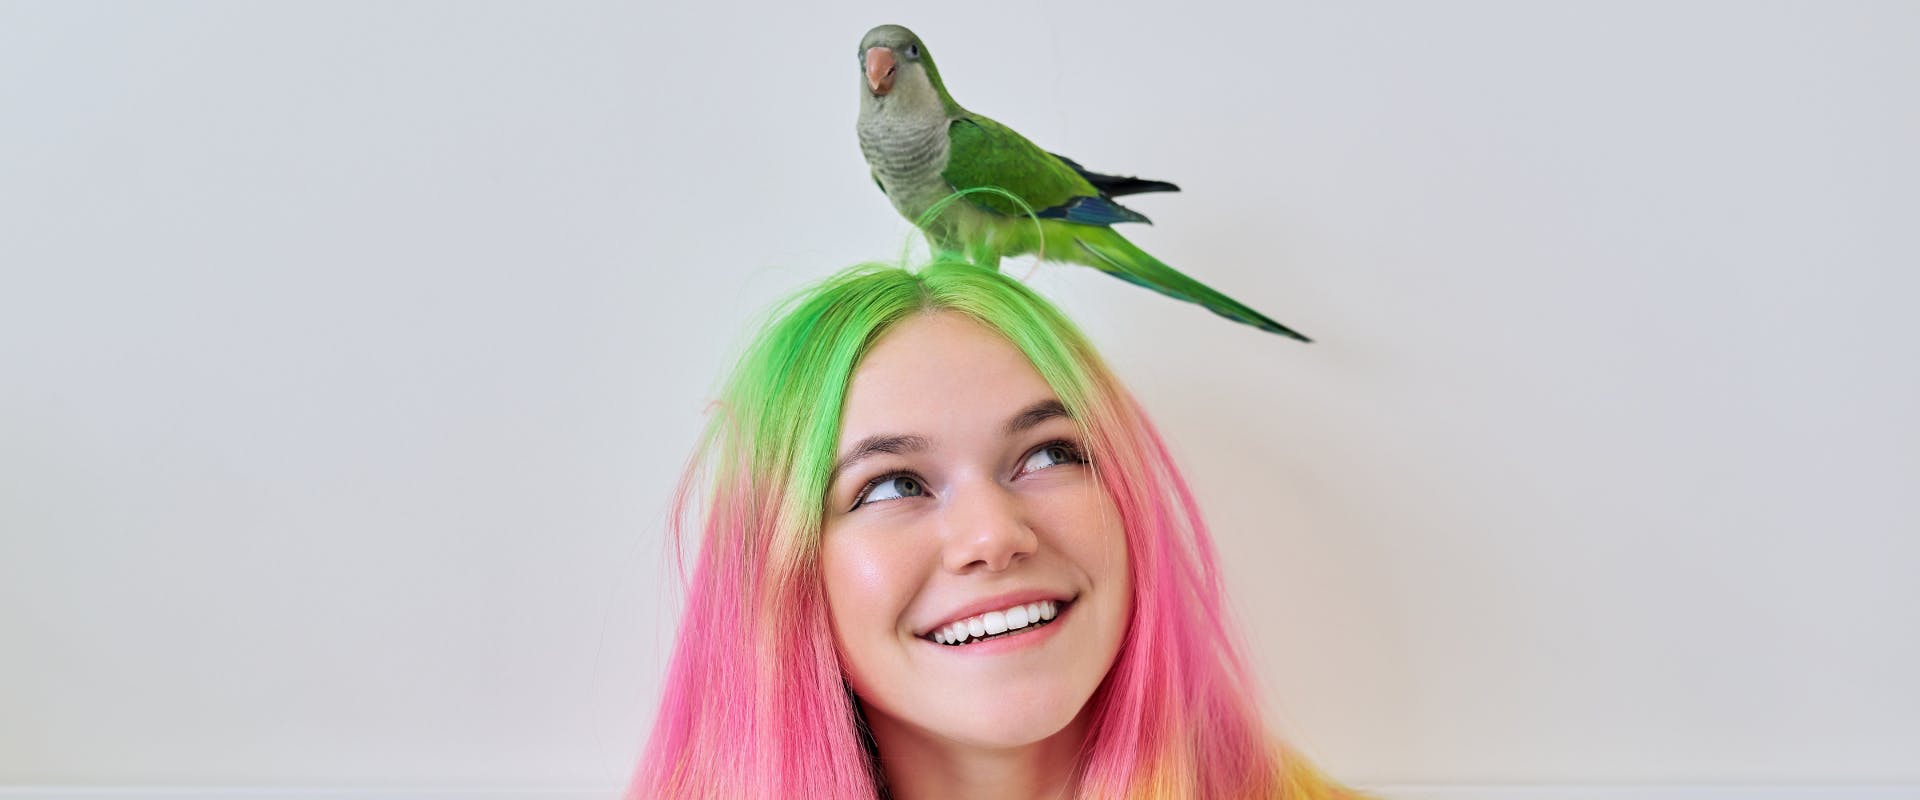 a pet sitter with multi-colored hair looking up at a green parrot sat on her head